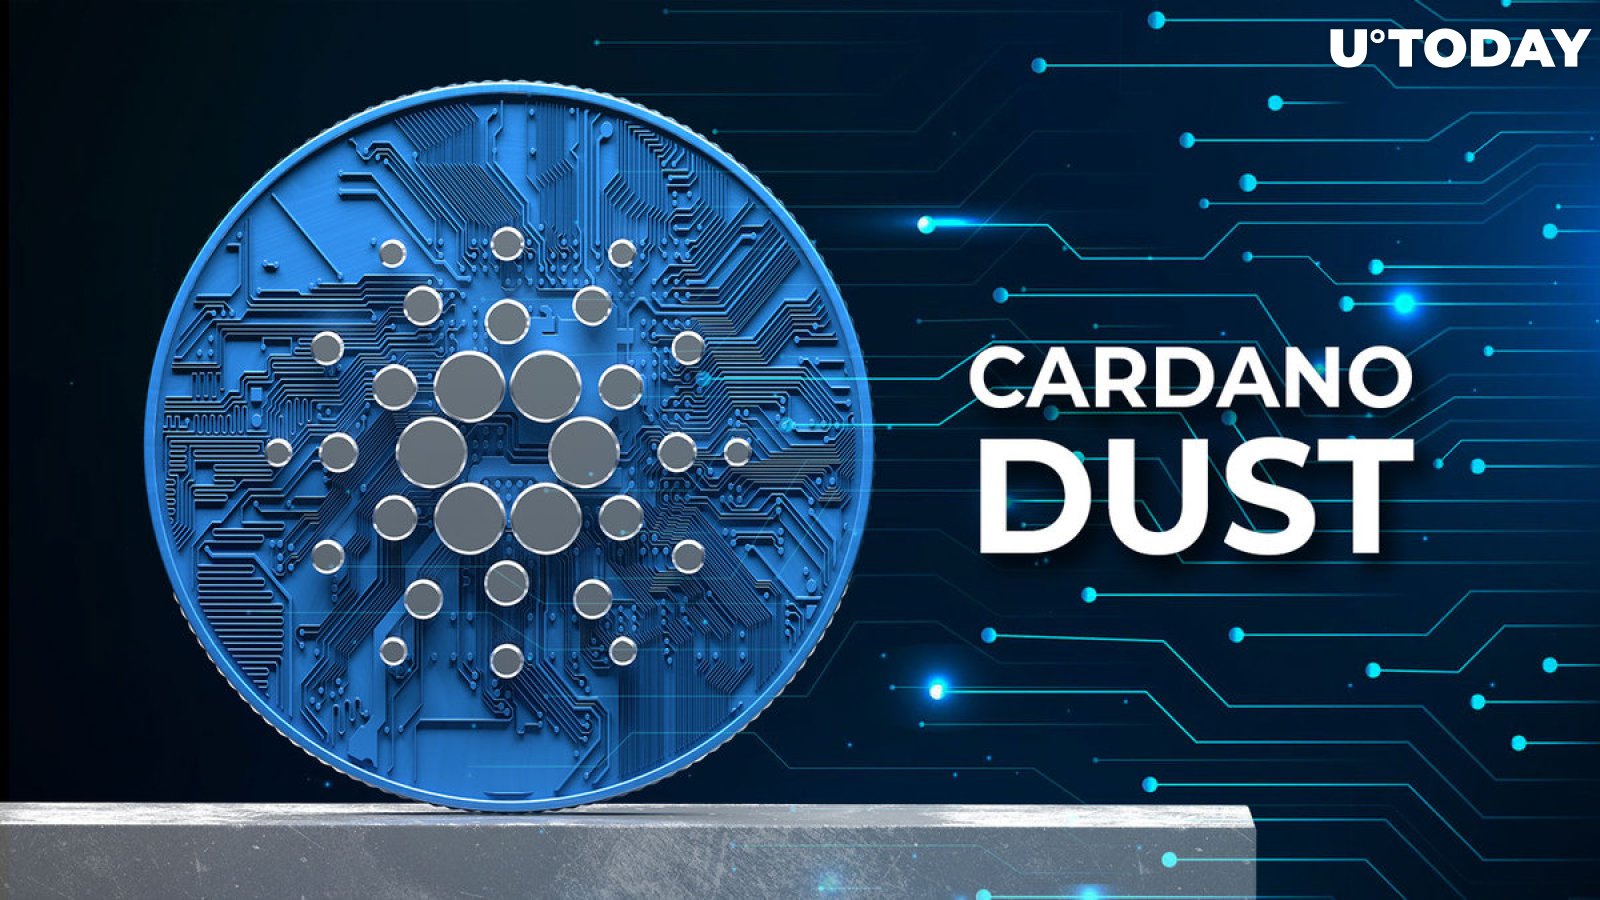 Cardano Just Introduced DUST Token, Here's What Is Known